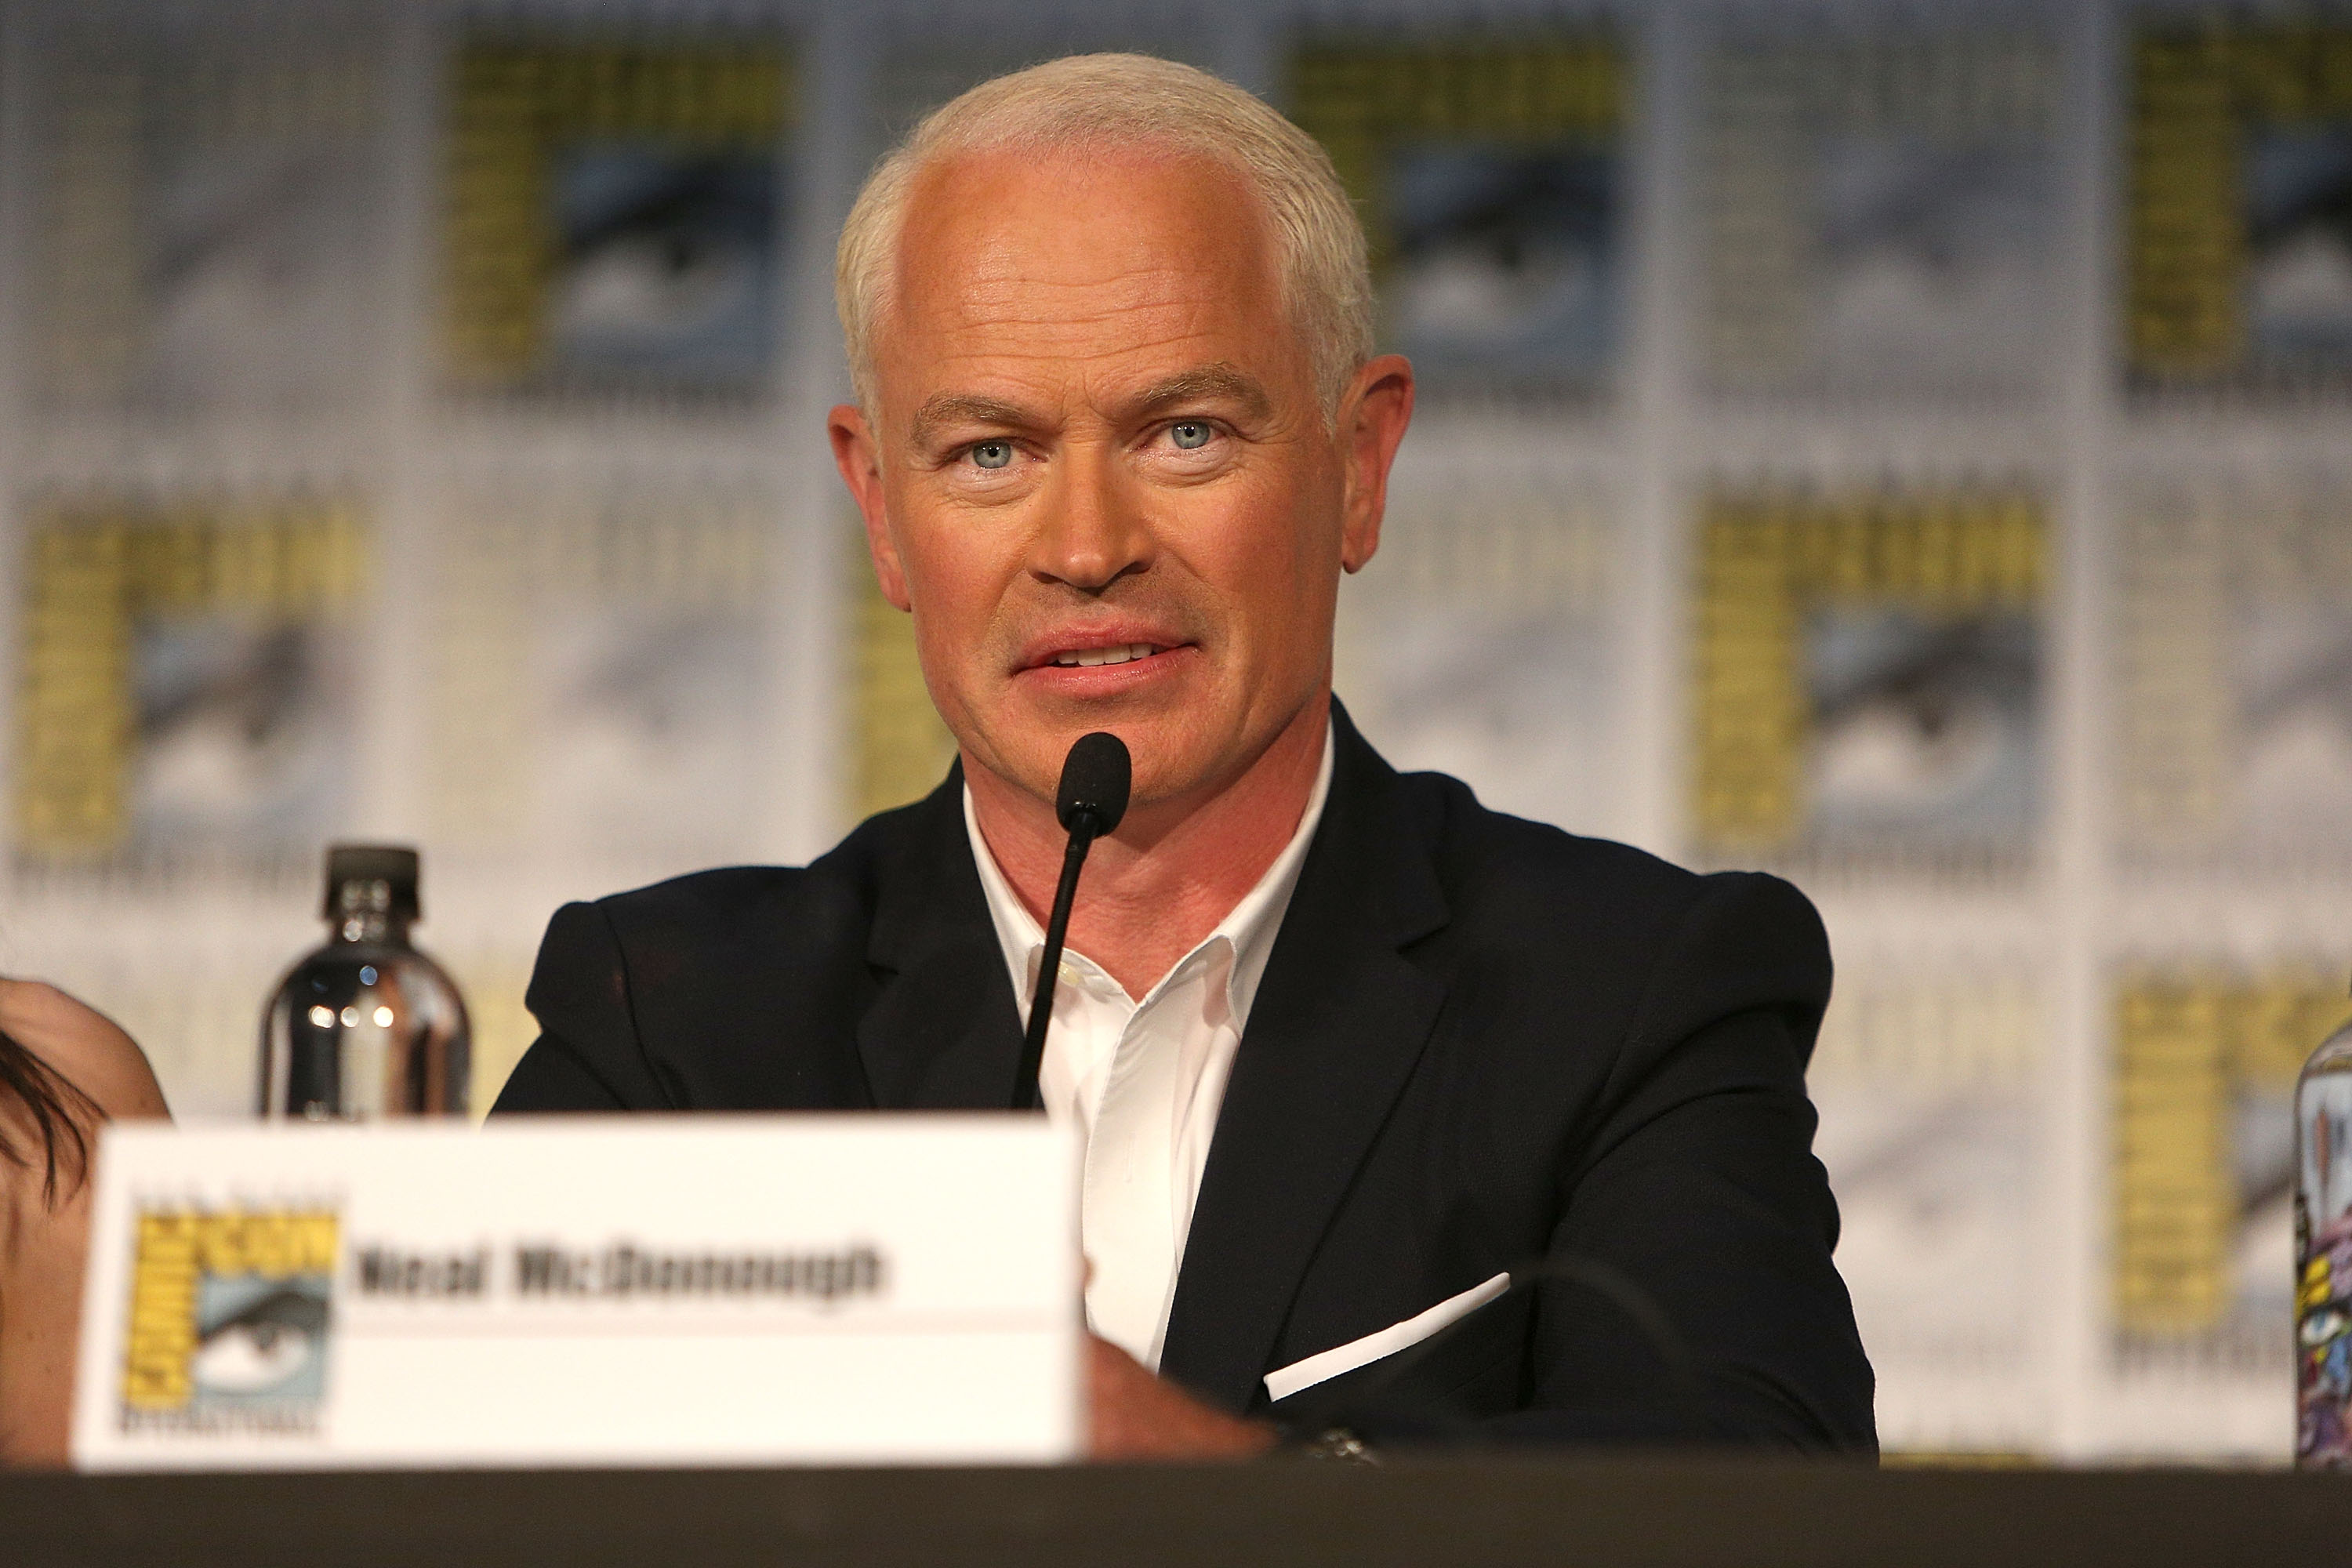 Neal McDonough attends the Project Blue Book panel at Comic-Con International on July 21, 2018 in San Diego, California | Source: Getty Images